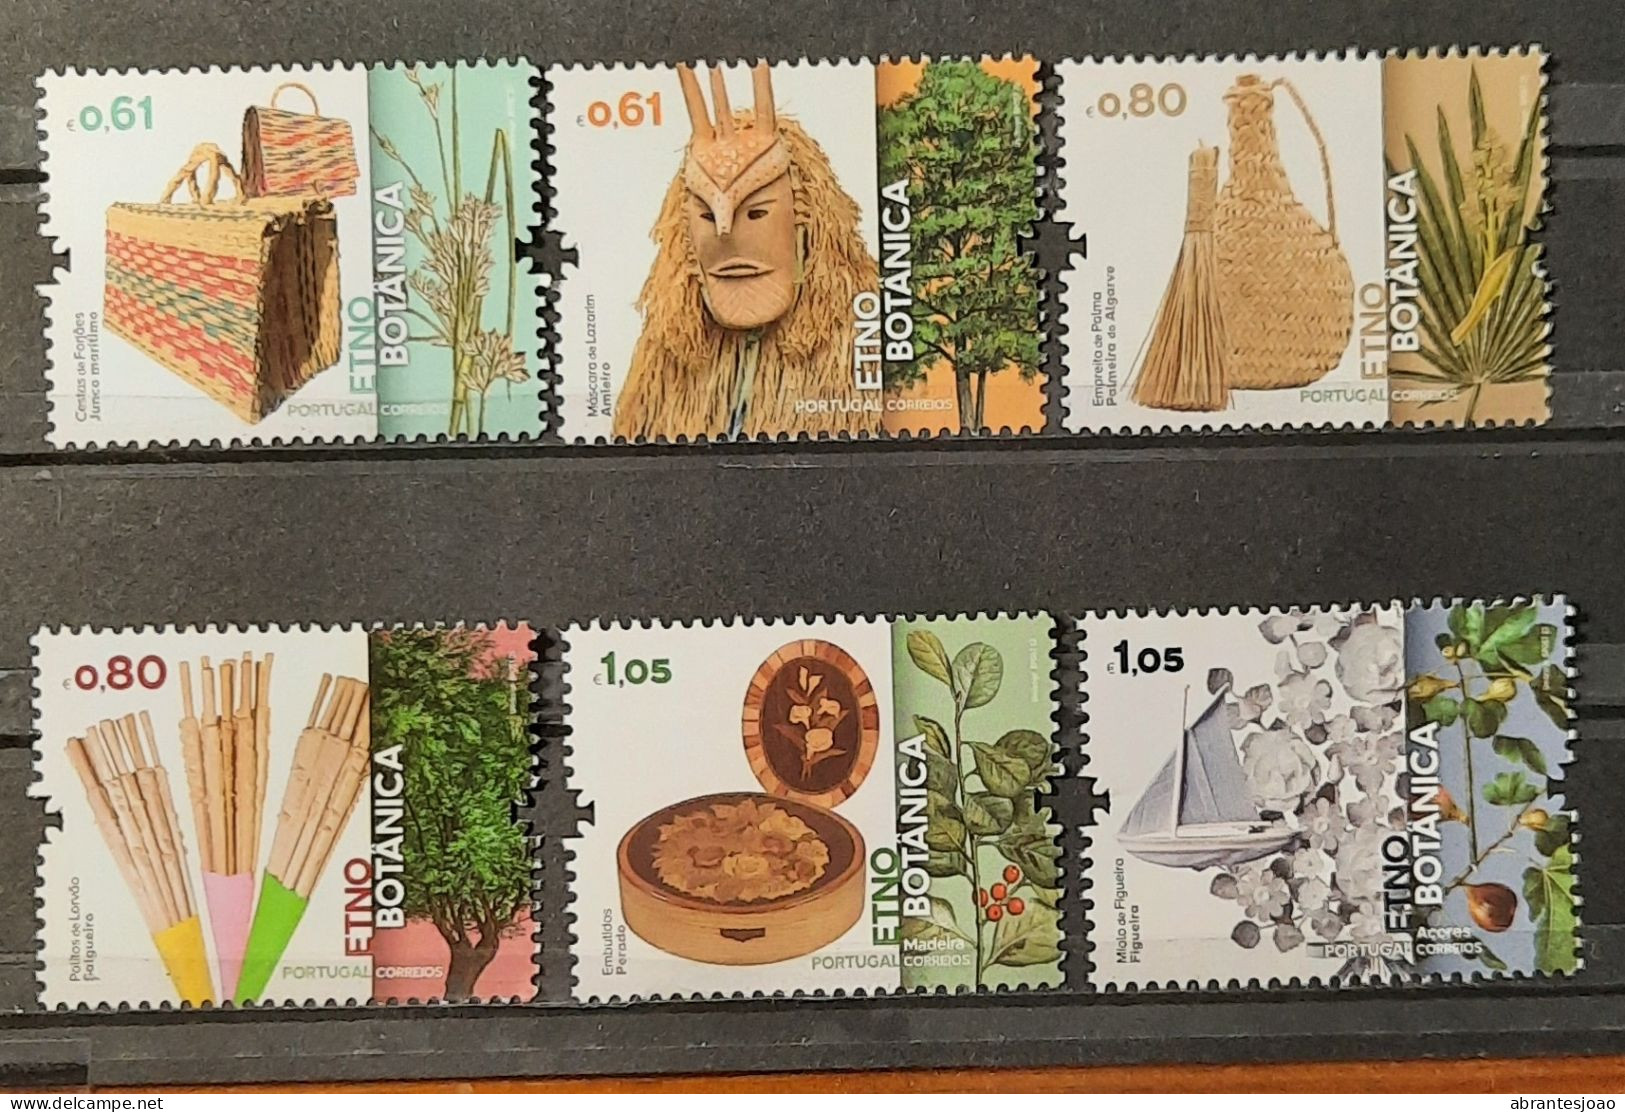 2023 - Portugal - MNH - Ethnobotany  - Interaction Between Humans And Plants - 6 Stamps + Block Of 2 Stamps - Ongebruikt